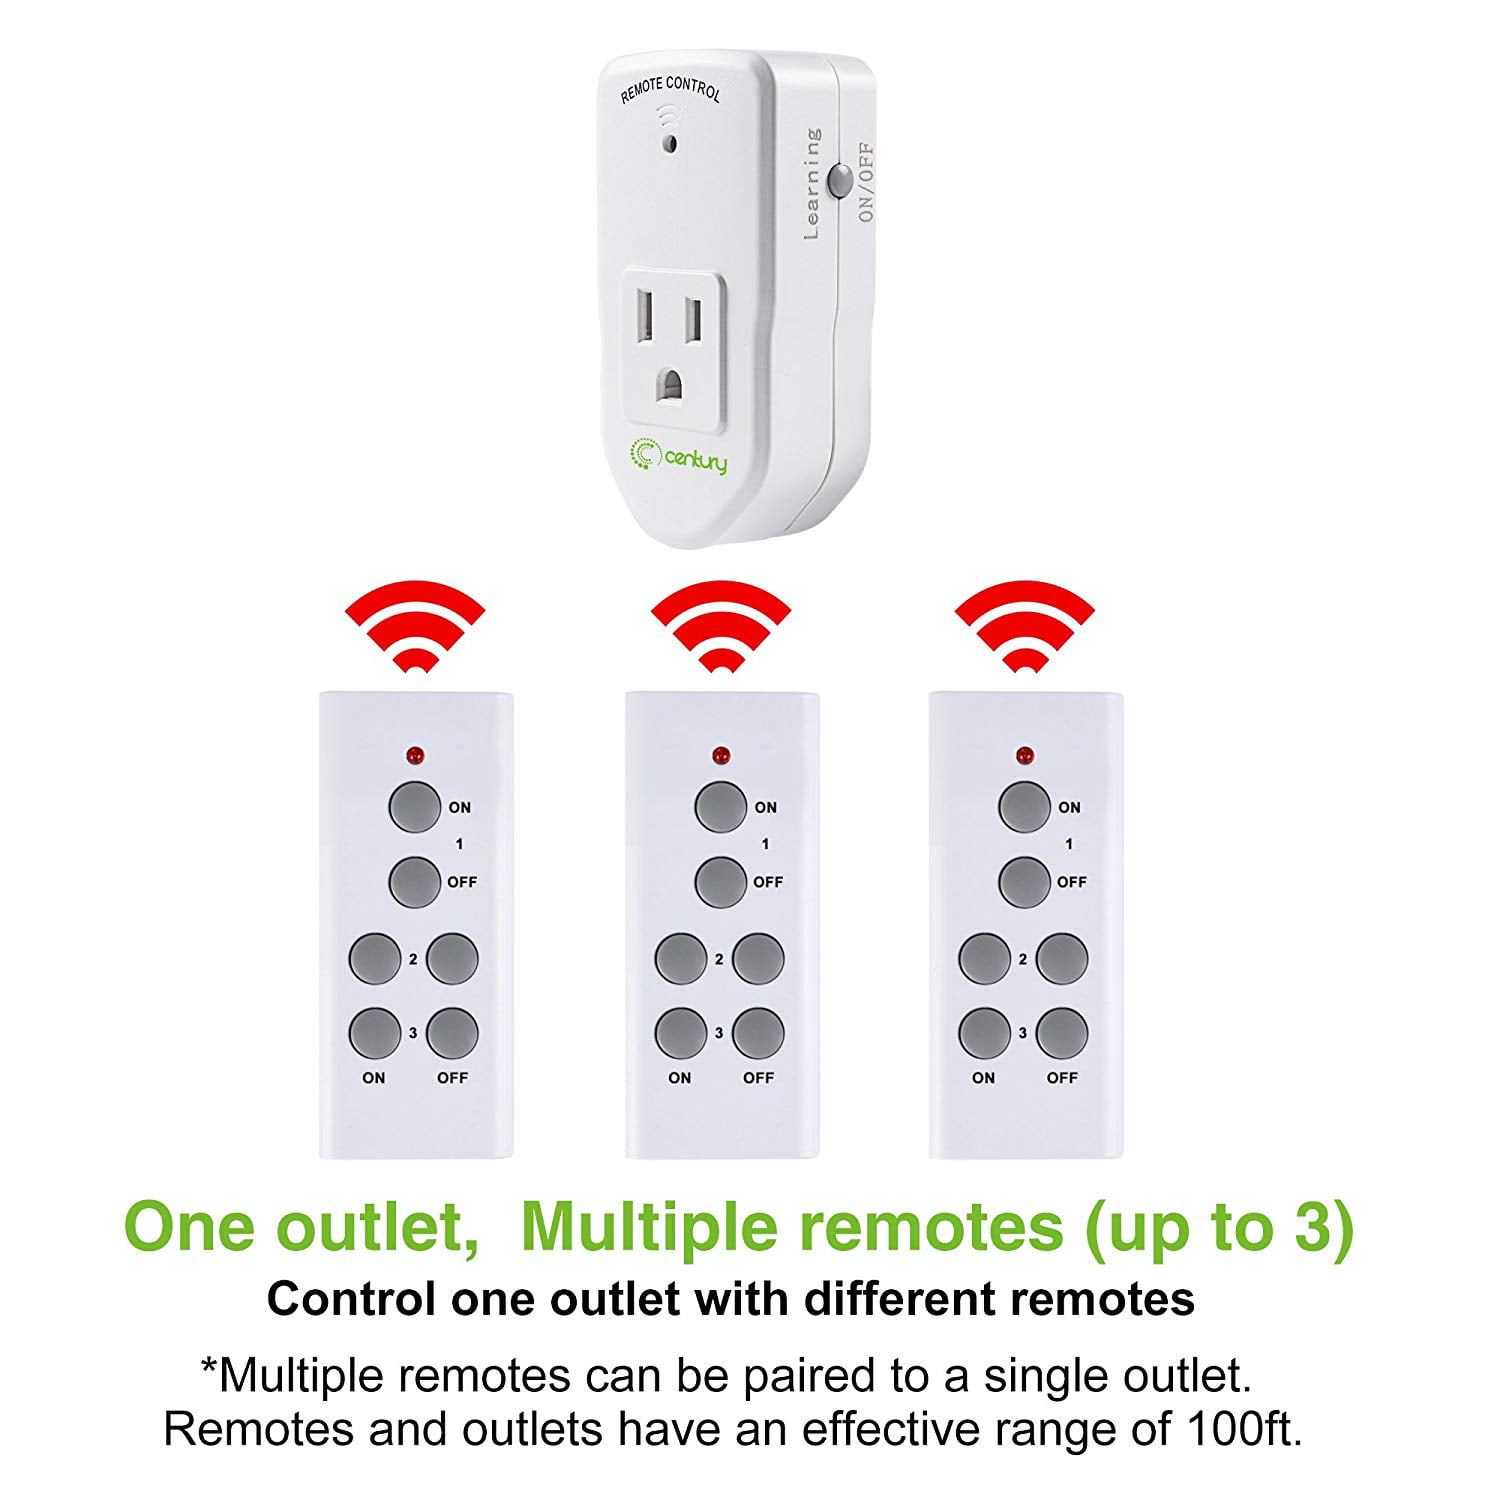 BN-LINK Wireless Remote Control Outlet (1 Remotes + 3 Outlets) Value Pack